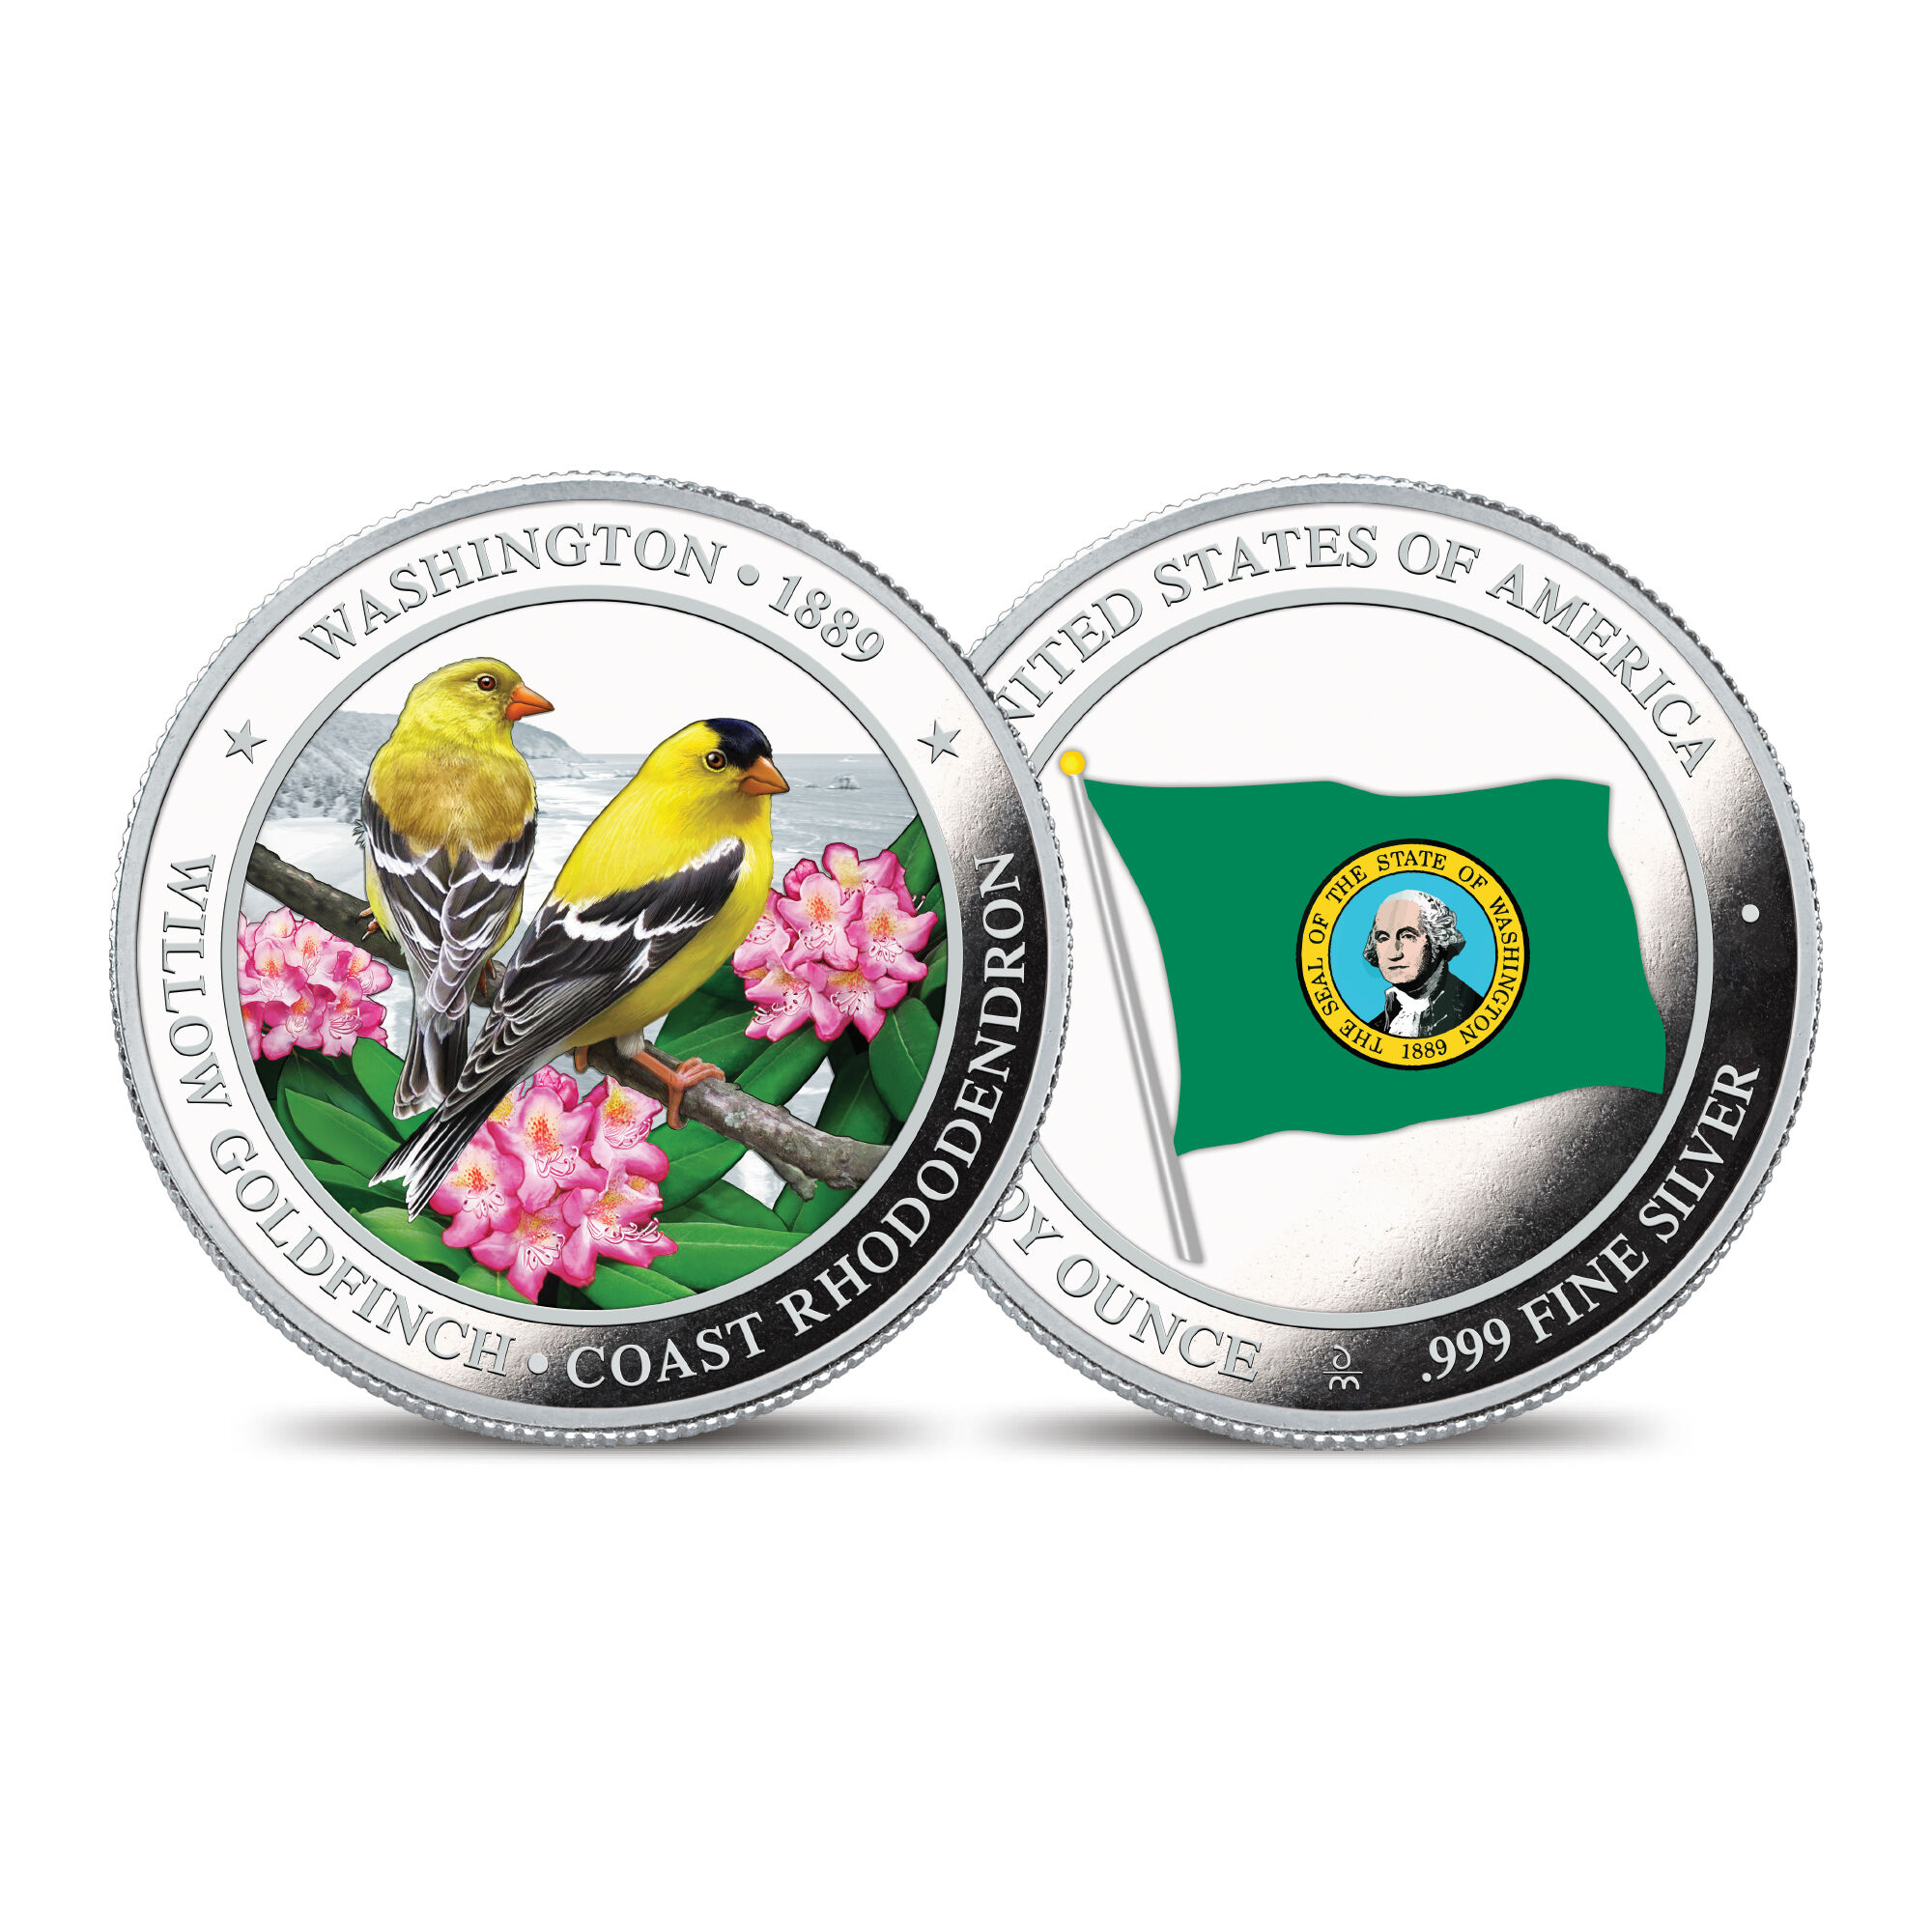 The State Bird and Flower Silver Commemoratives 2167 0088 a commemorativeWA